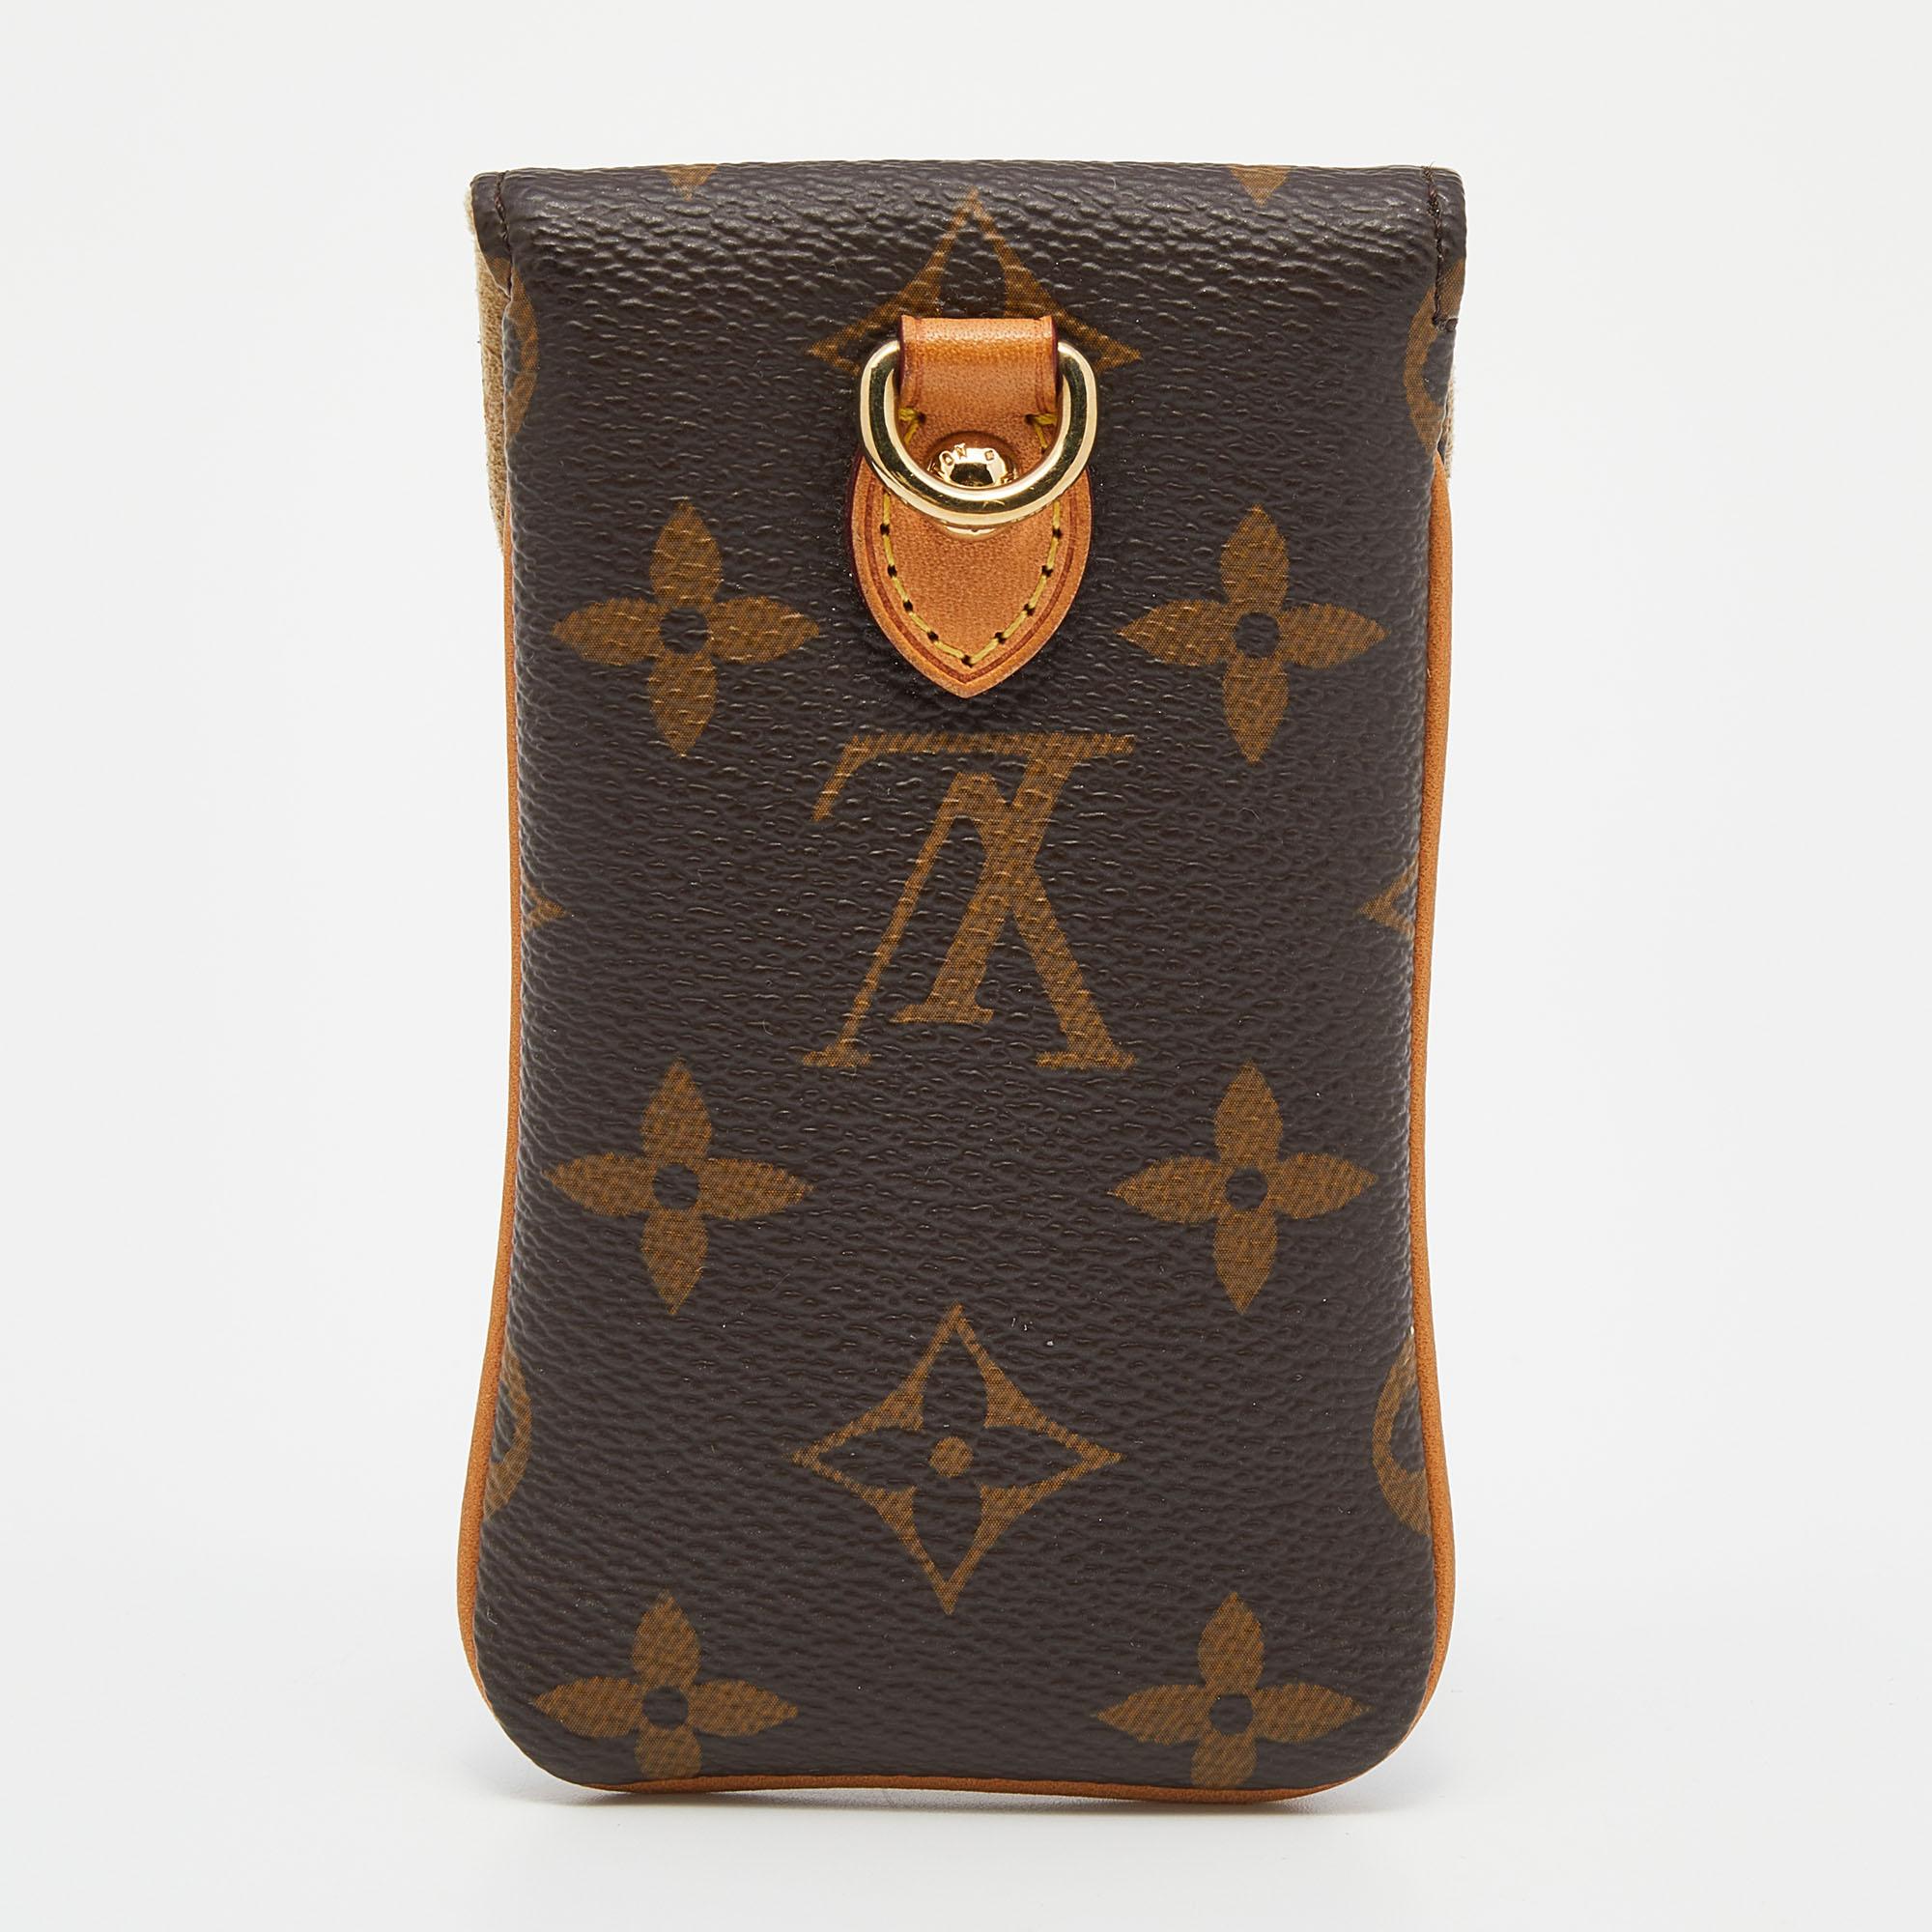 Crafted using monogram canvas, this phone case by Louis Vuitton is sized to safely house your phone. It has a fine finish with a press lock on the flap.